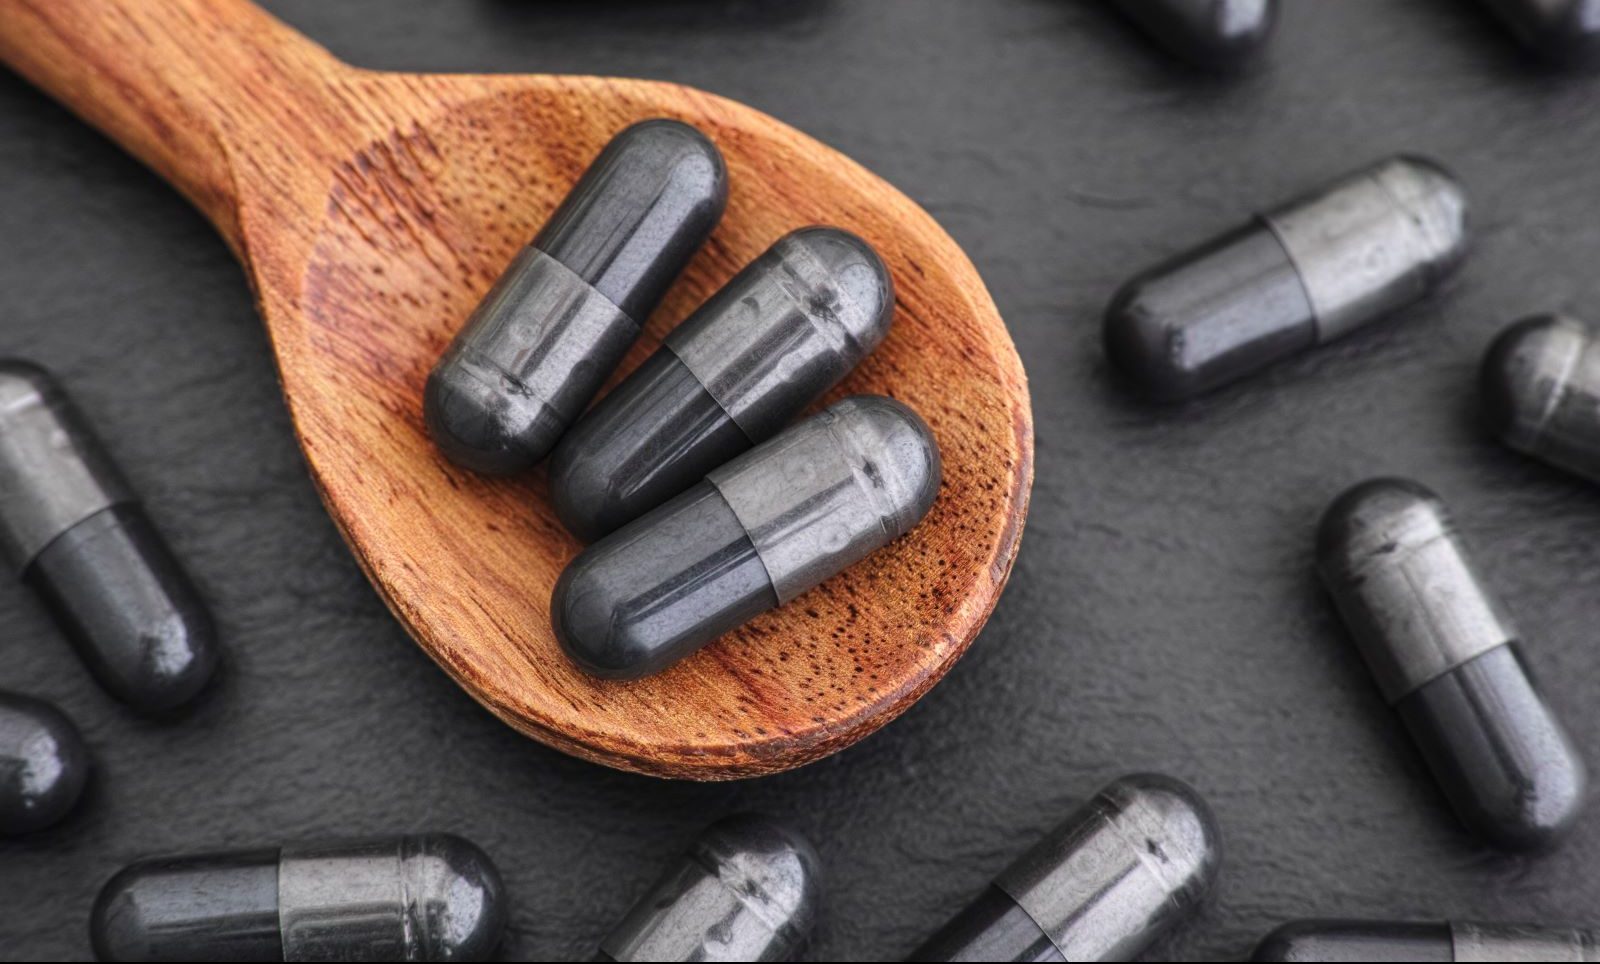 Activated charcoal, which is known for absorbing toxins, is now sold as charcoal pills for stomach issues. Here’s why you steer clear.